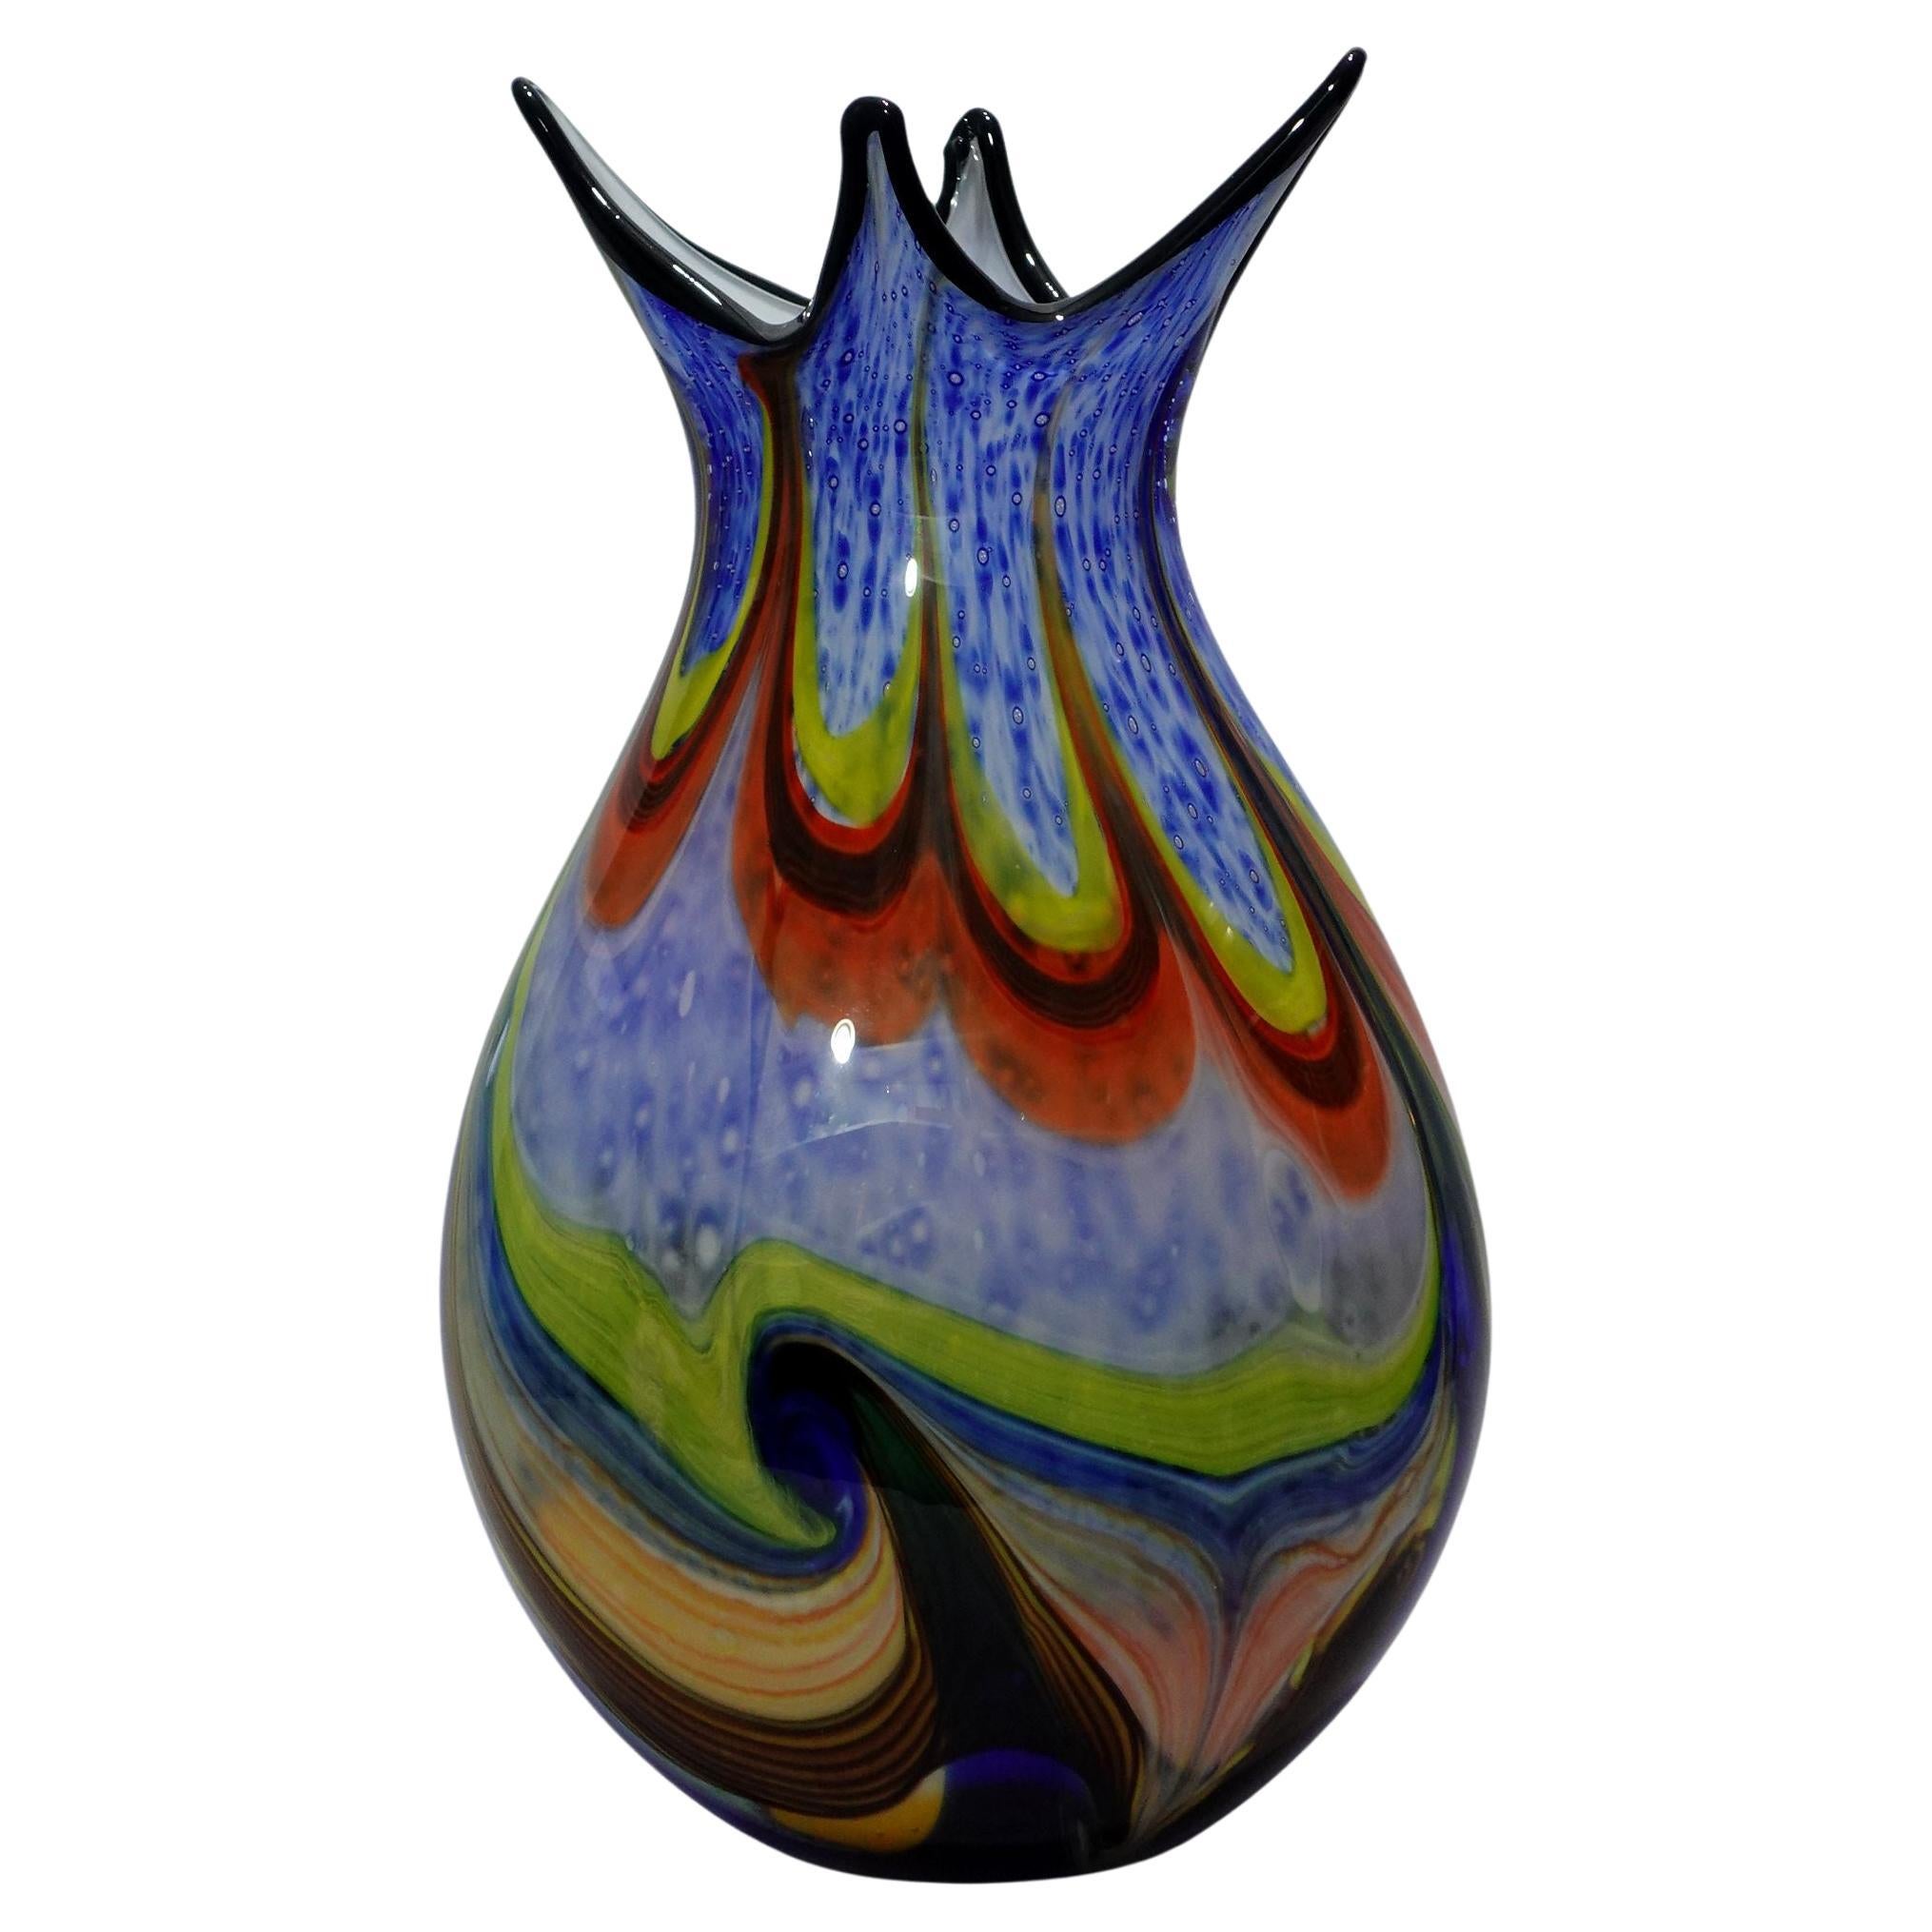 A Large and Heavy Murano Hand Blown Murrine Glass Vase w/ Shaped Top